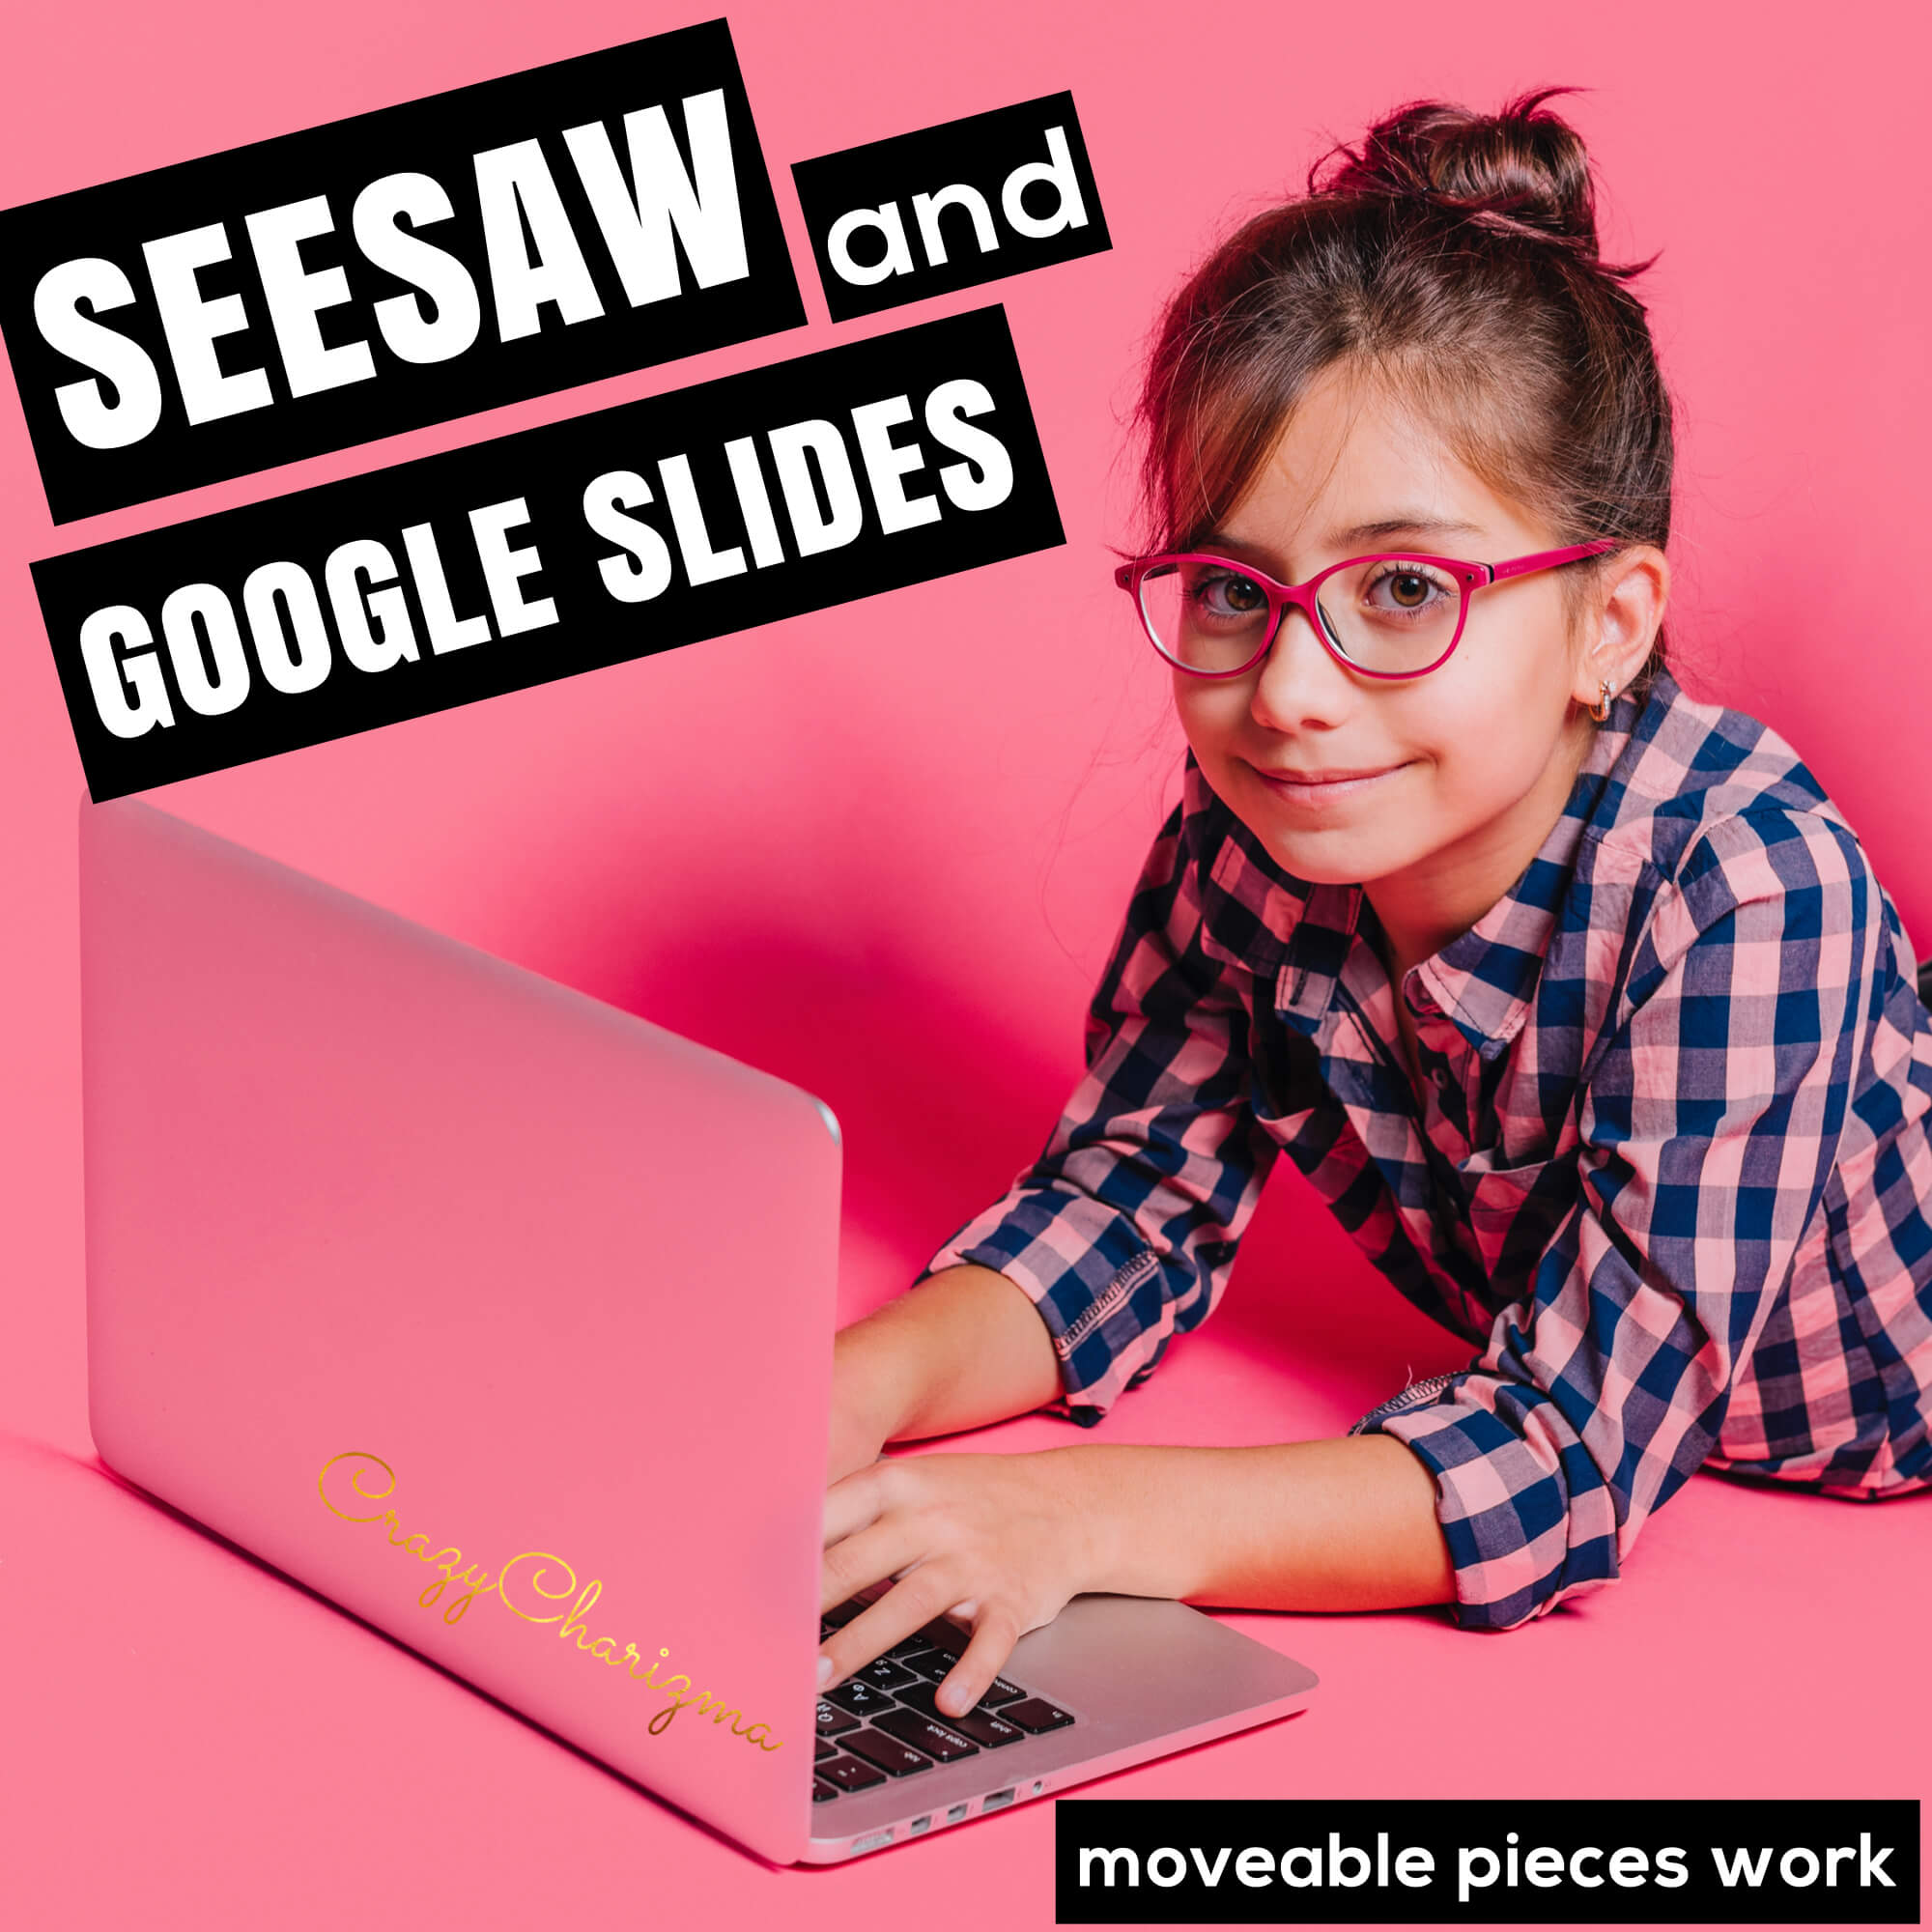 Seesaw tips for teachers. So many of you asked me to share Seesaw tips and tricks. Here they are! These tips and hacks will save you time while preparing lesson plans in Seesaw and checking what your students turned in.